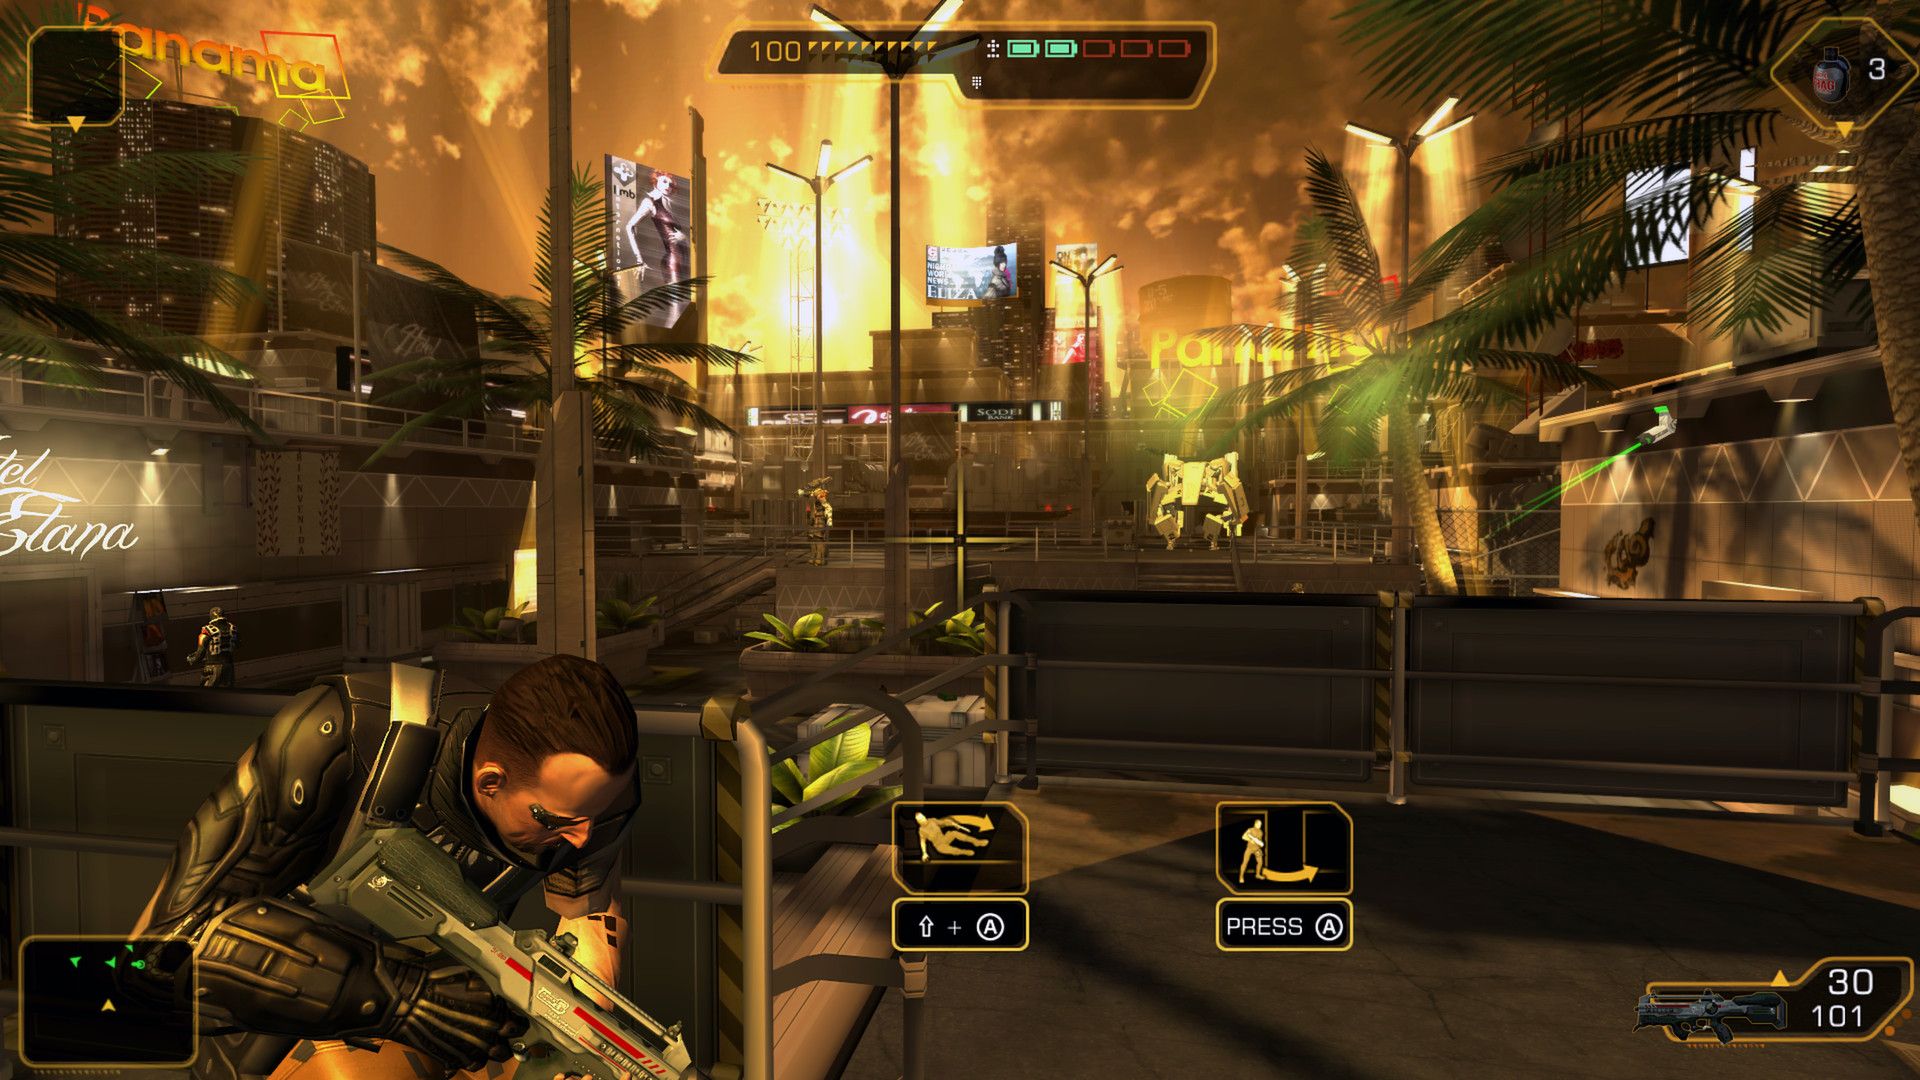 Remembering Deus Ex The Fall One Of The Worst Ports In The History Of PC Gaming